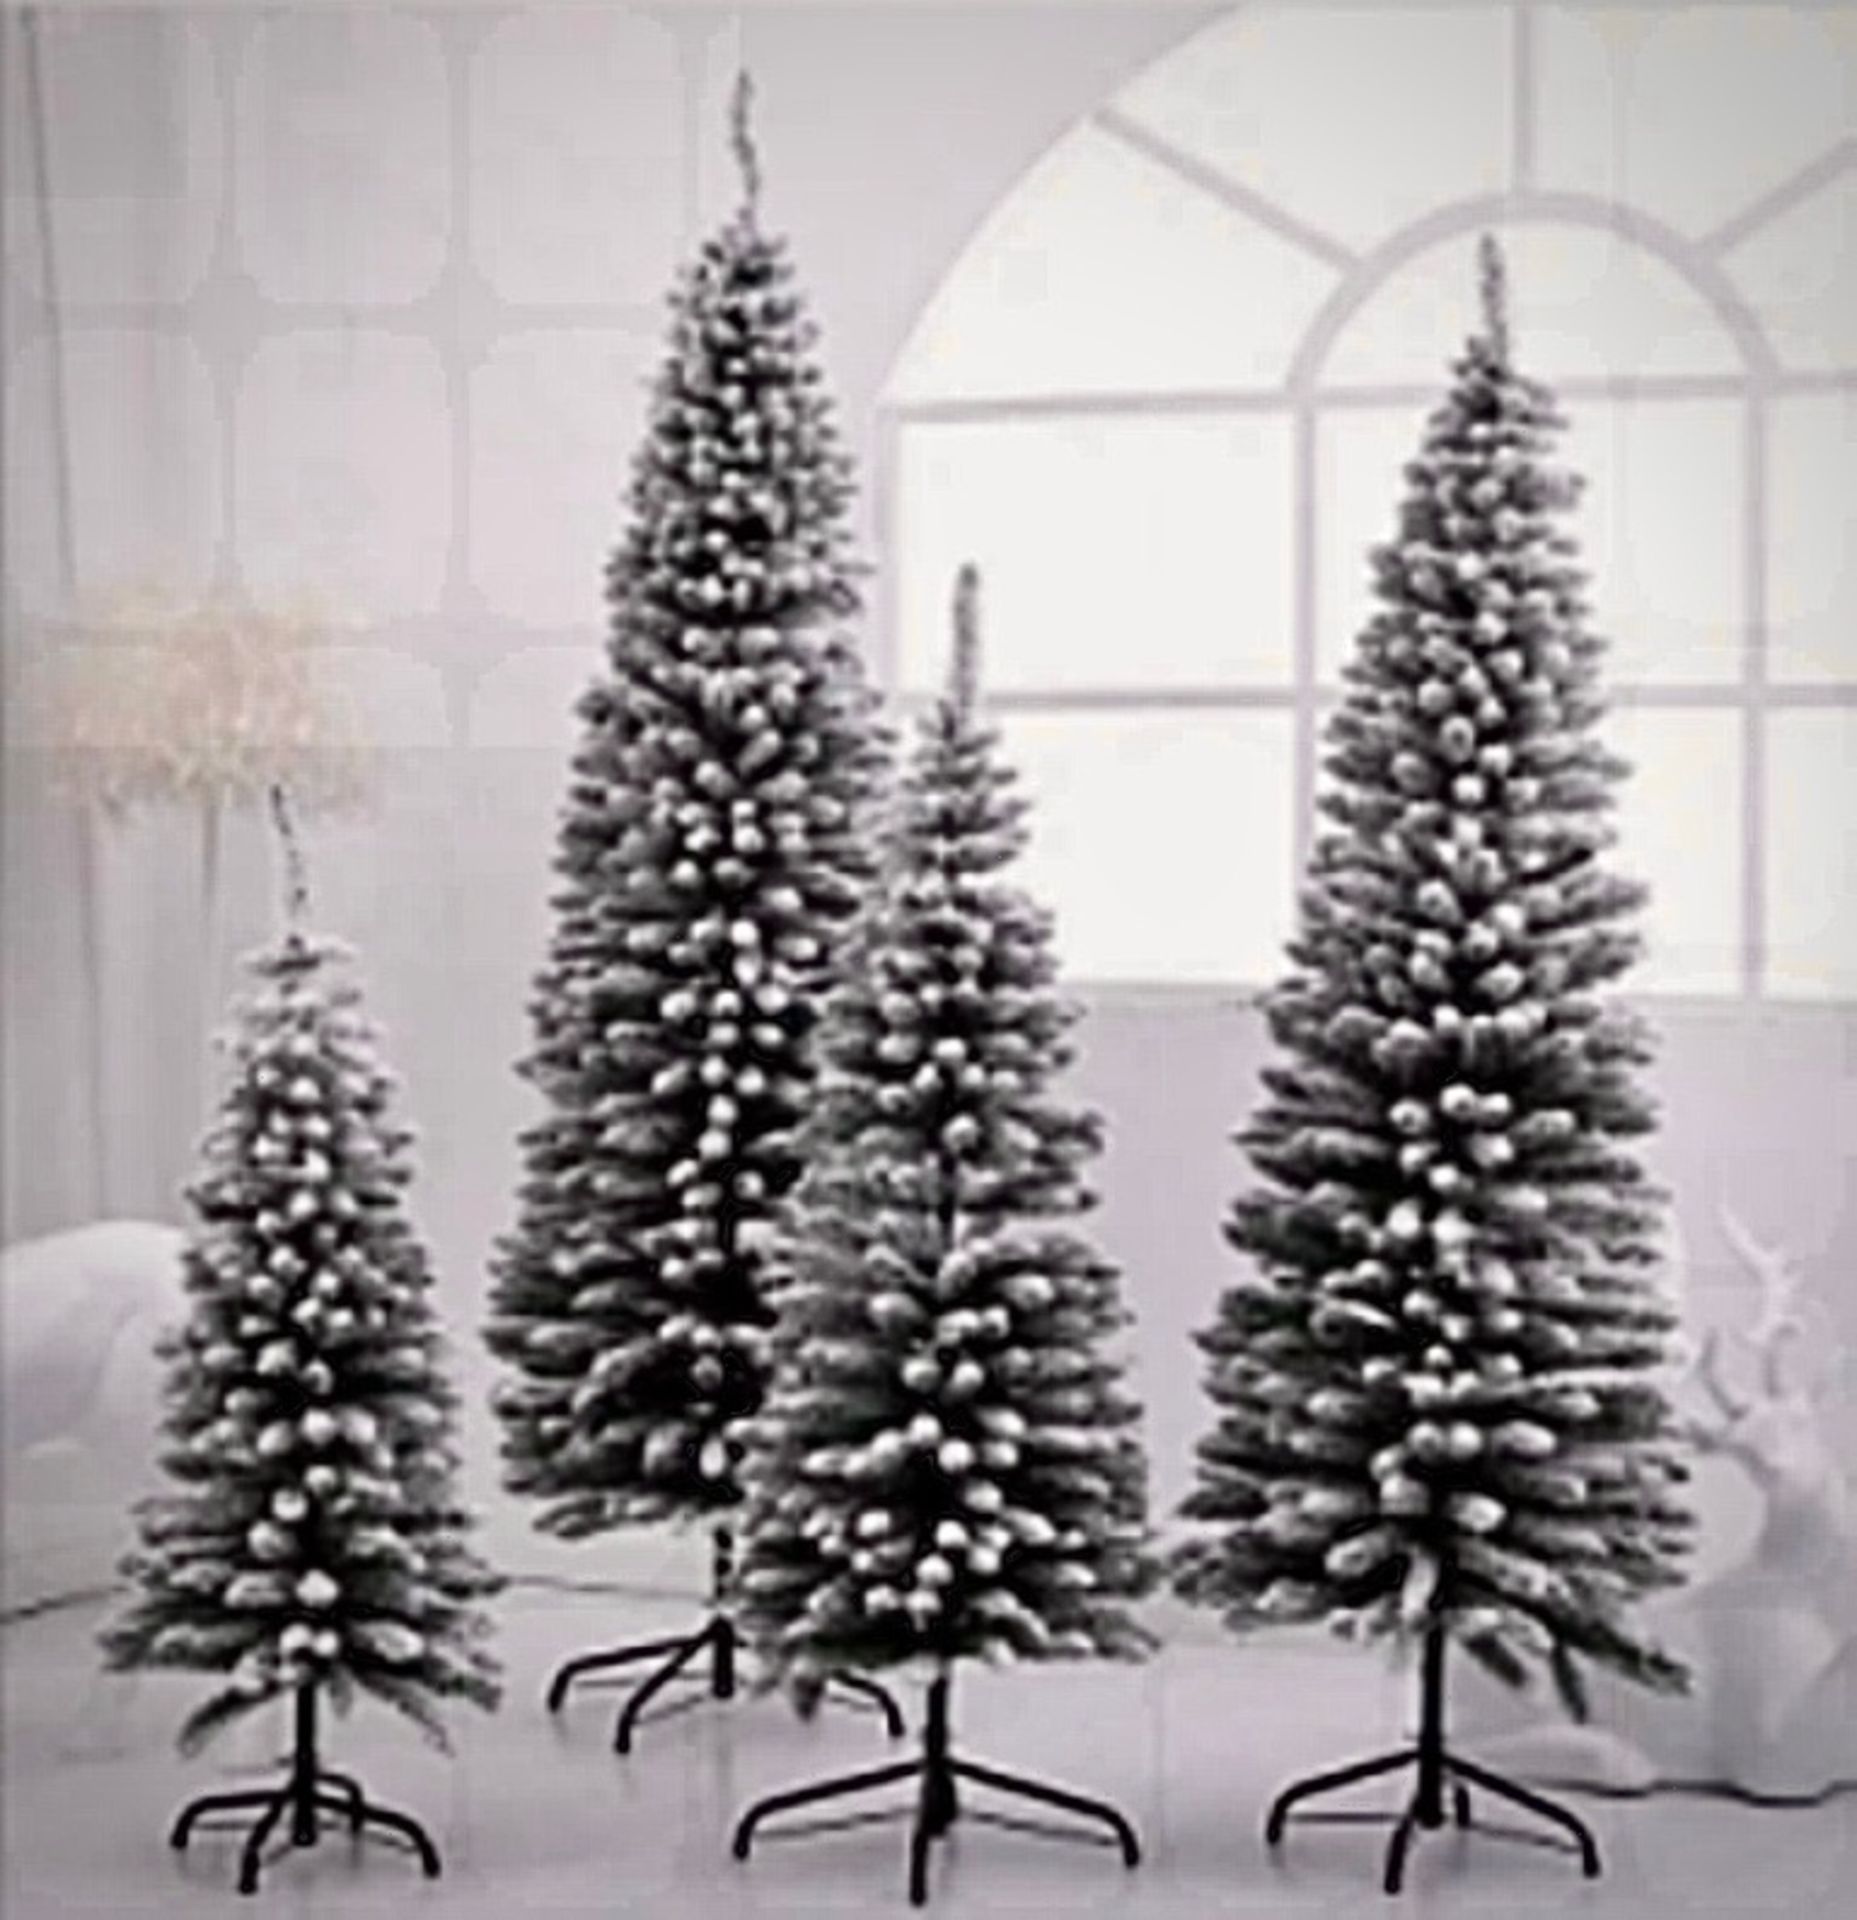 2 x 4ft Christmas Tree Artificial with Snow Frosted Tips Slim Pencil Shape - Image 2 of 2